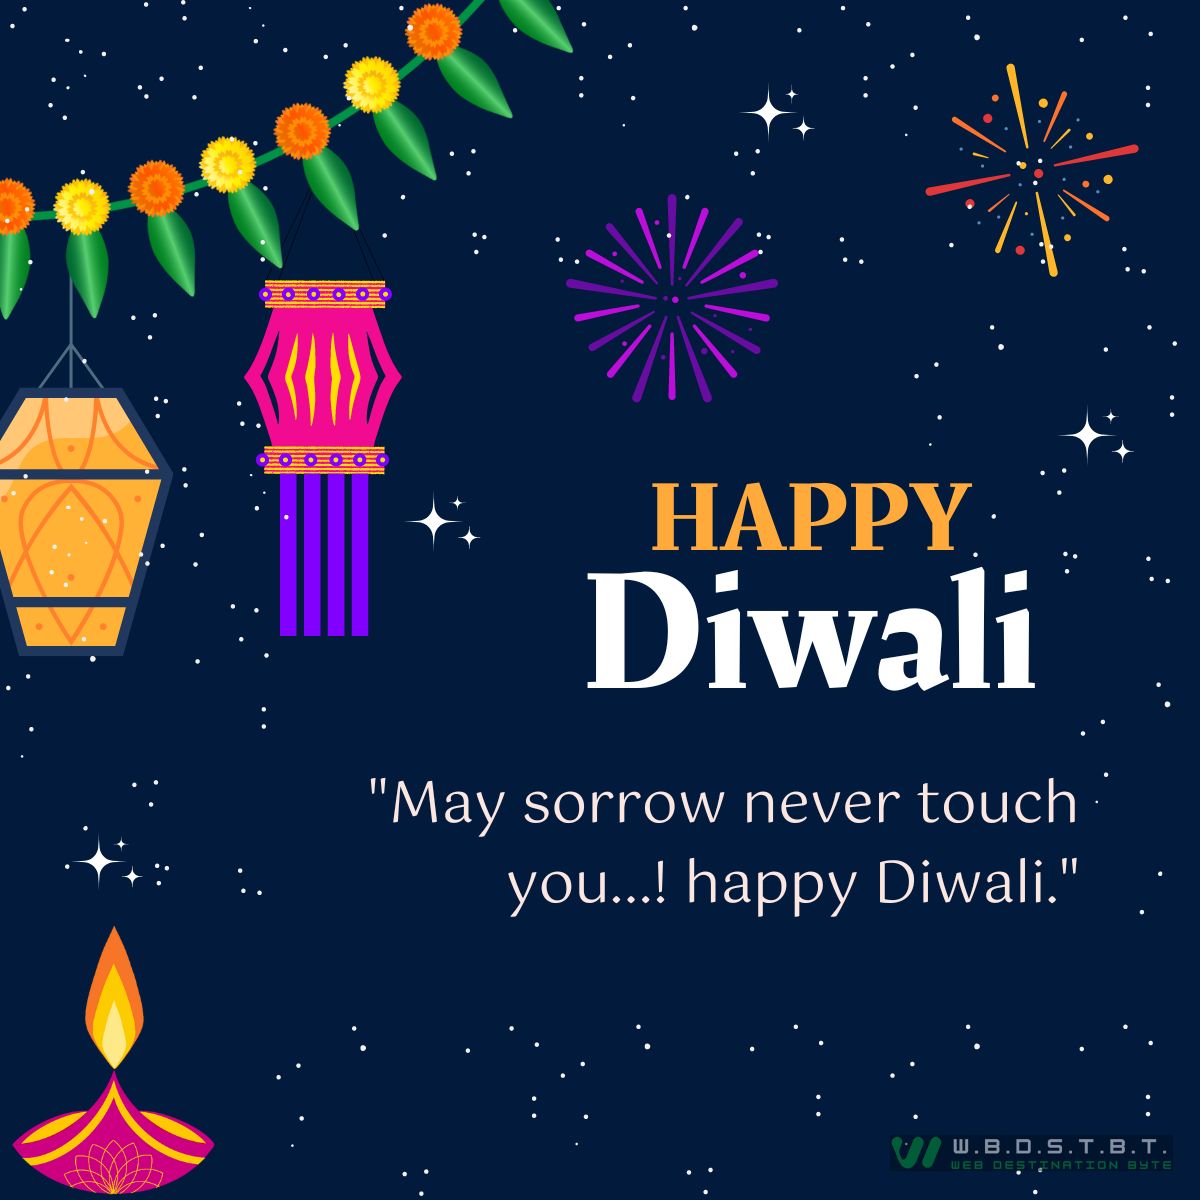 "May sorrow never touch you…! happy Diwali."